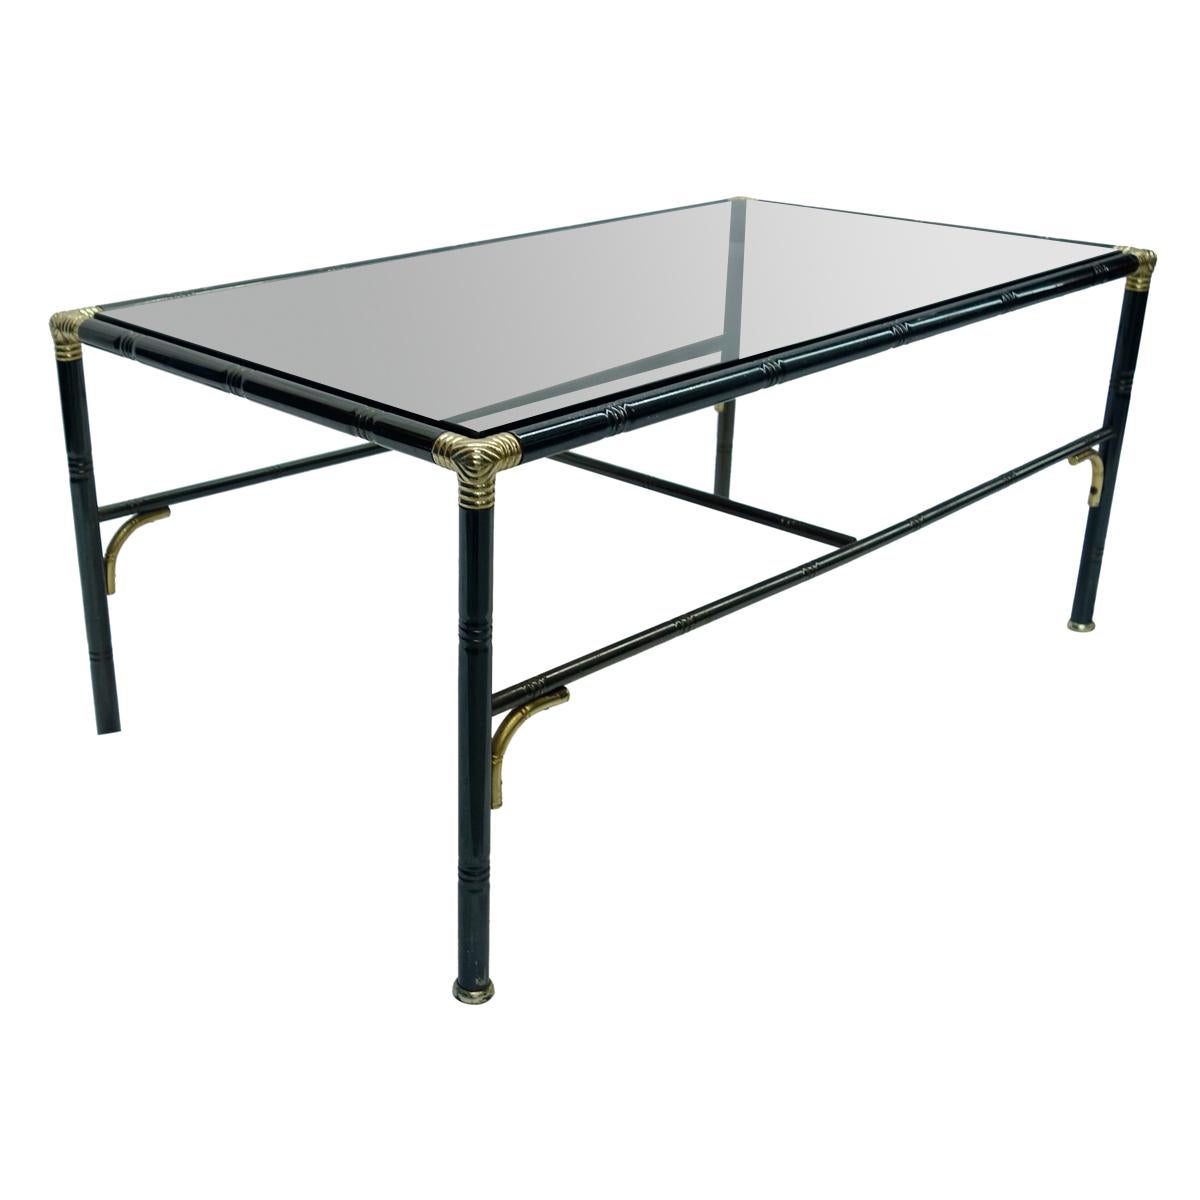 Hollywood Regency black steel rectangular faux bamboo coffee table with brass corners and details. The smoke glass top finishes off the elegance of this beautiful piece.